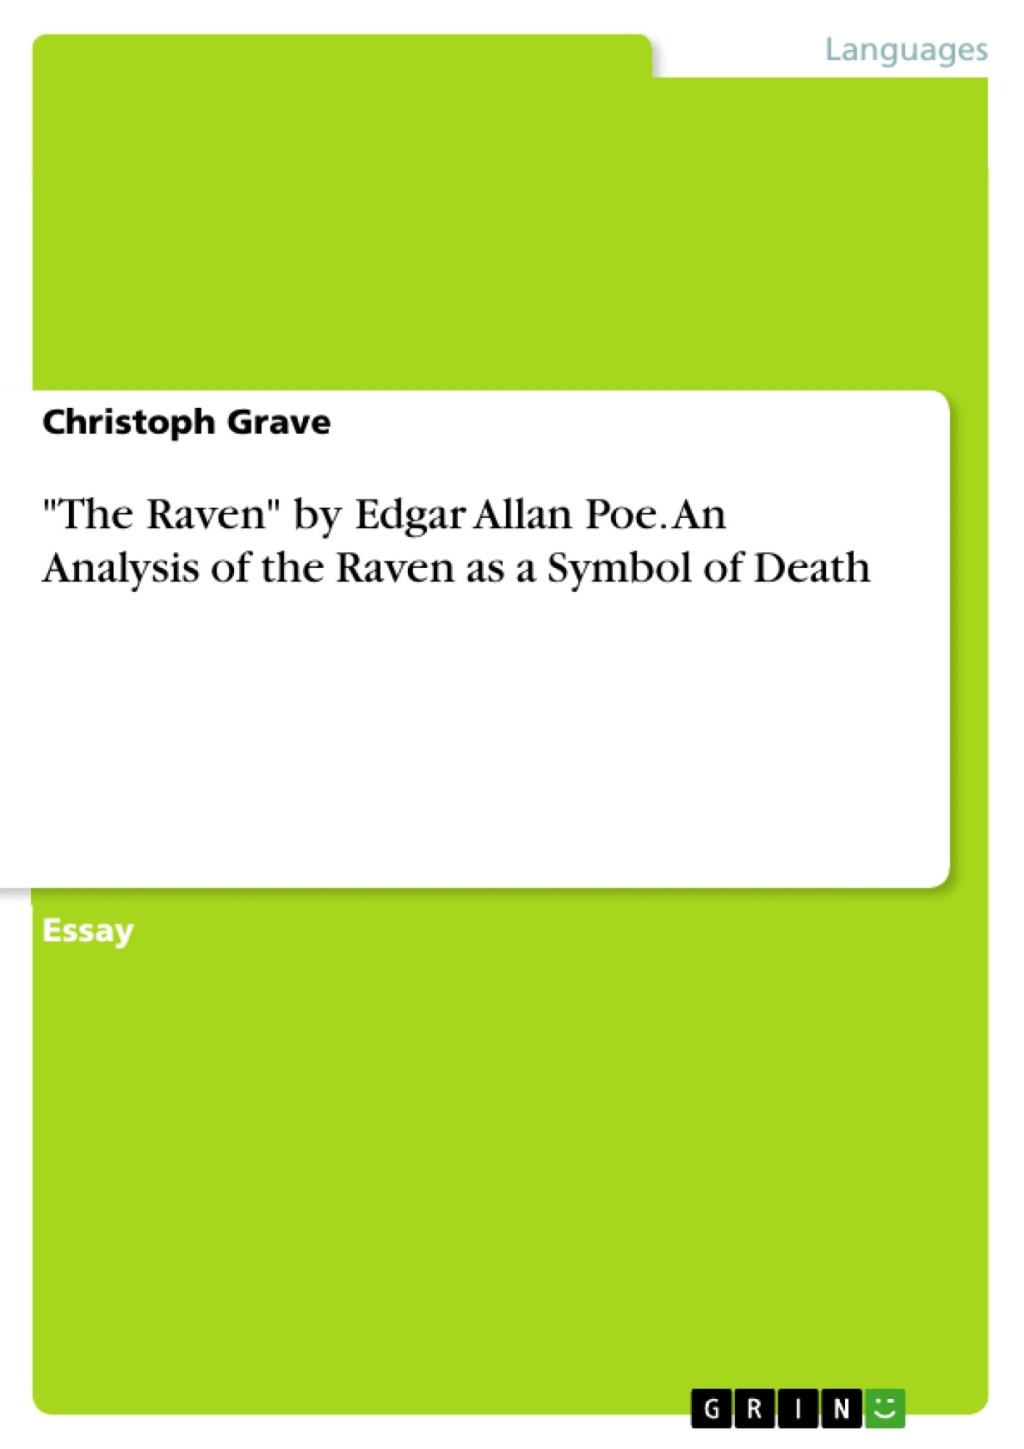 Picture of: The Raven” by Edgar Allan Poe